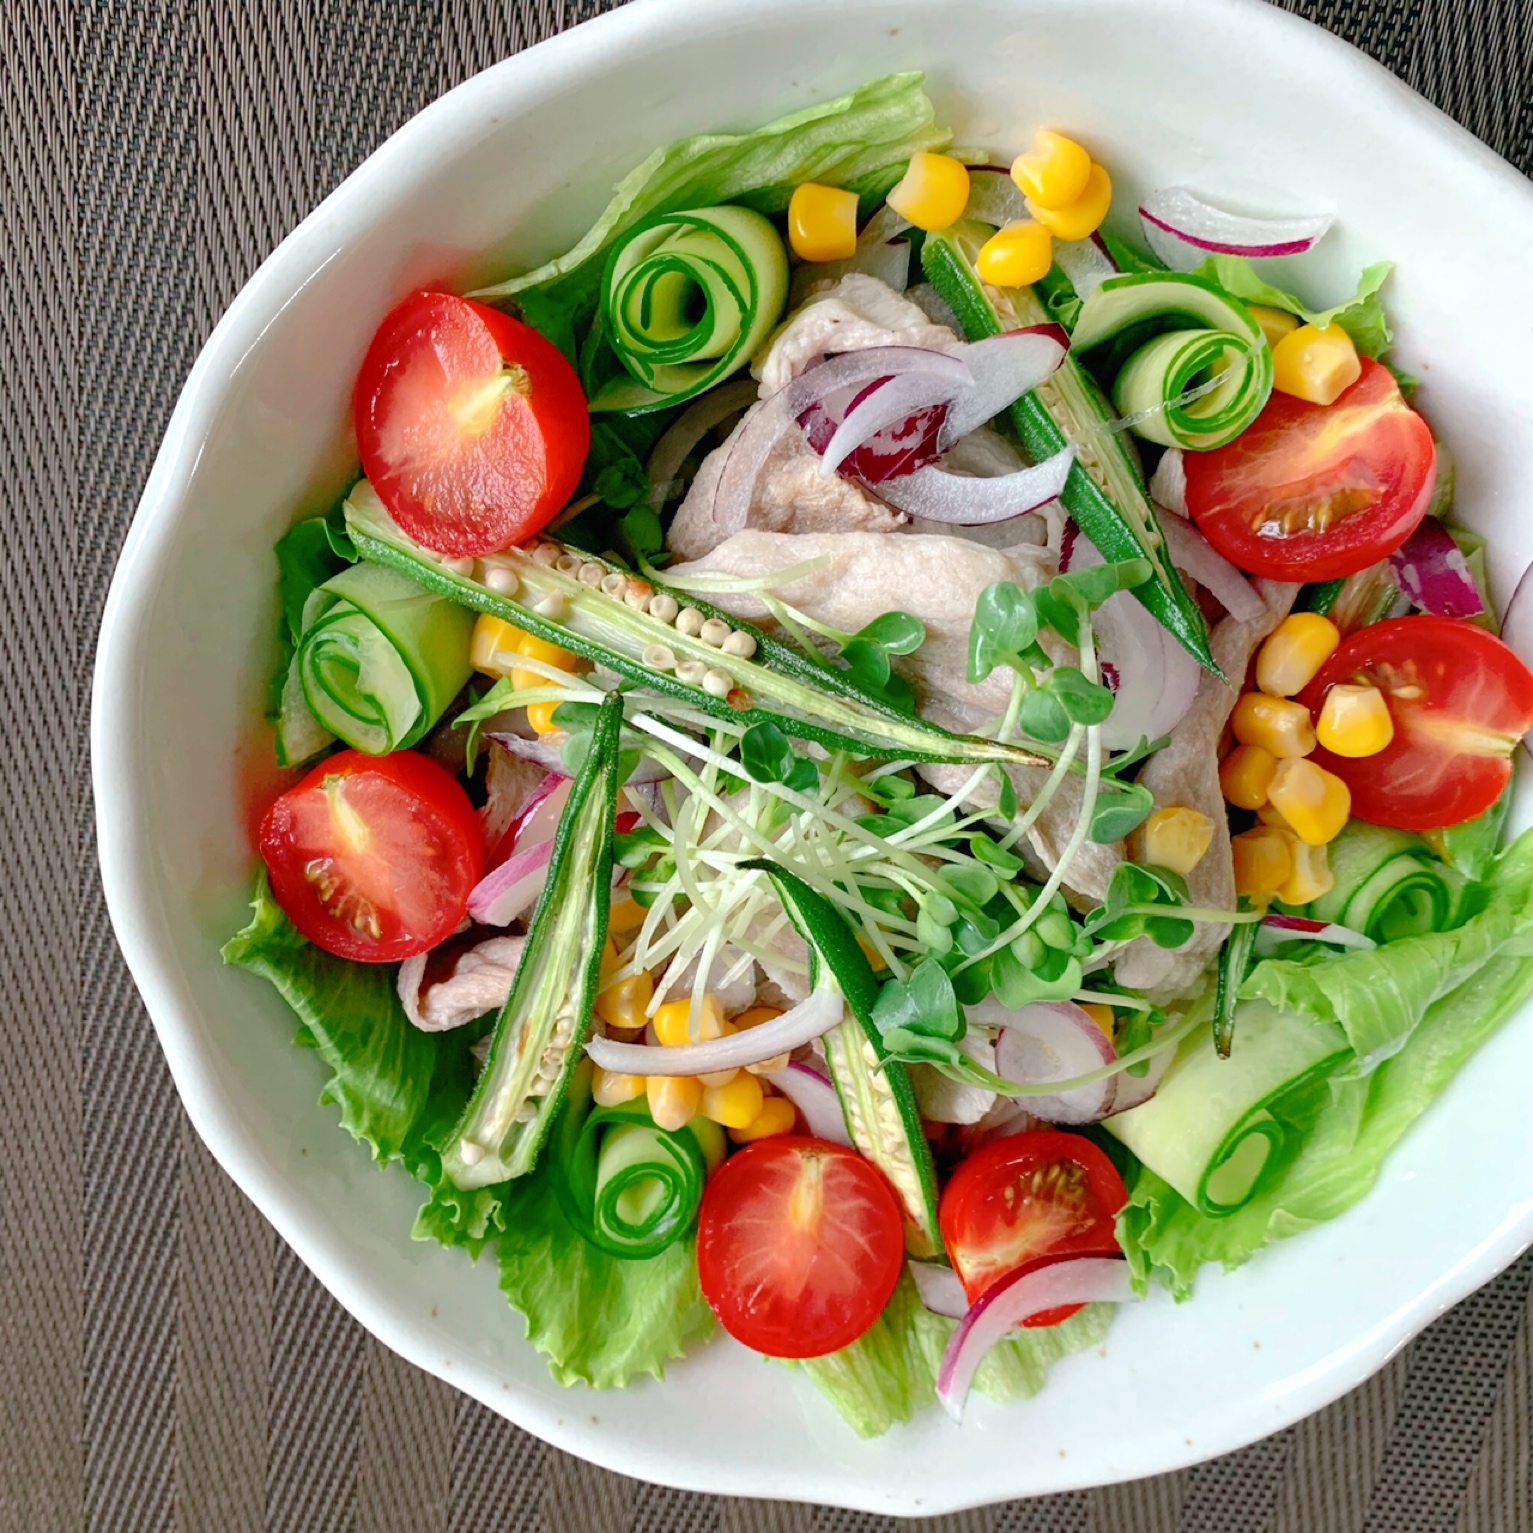 You can eat meat and vegetables, so this salad is full of nutrition. 